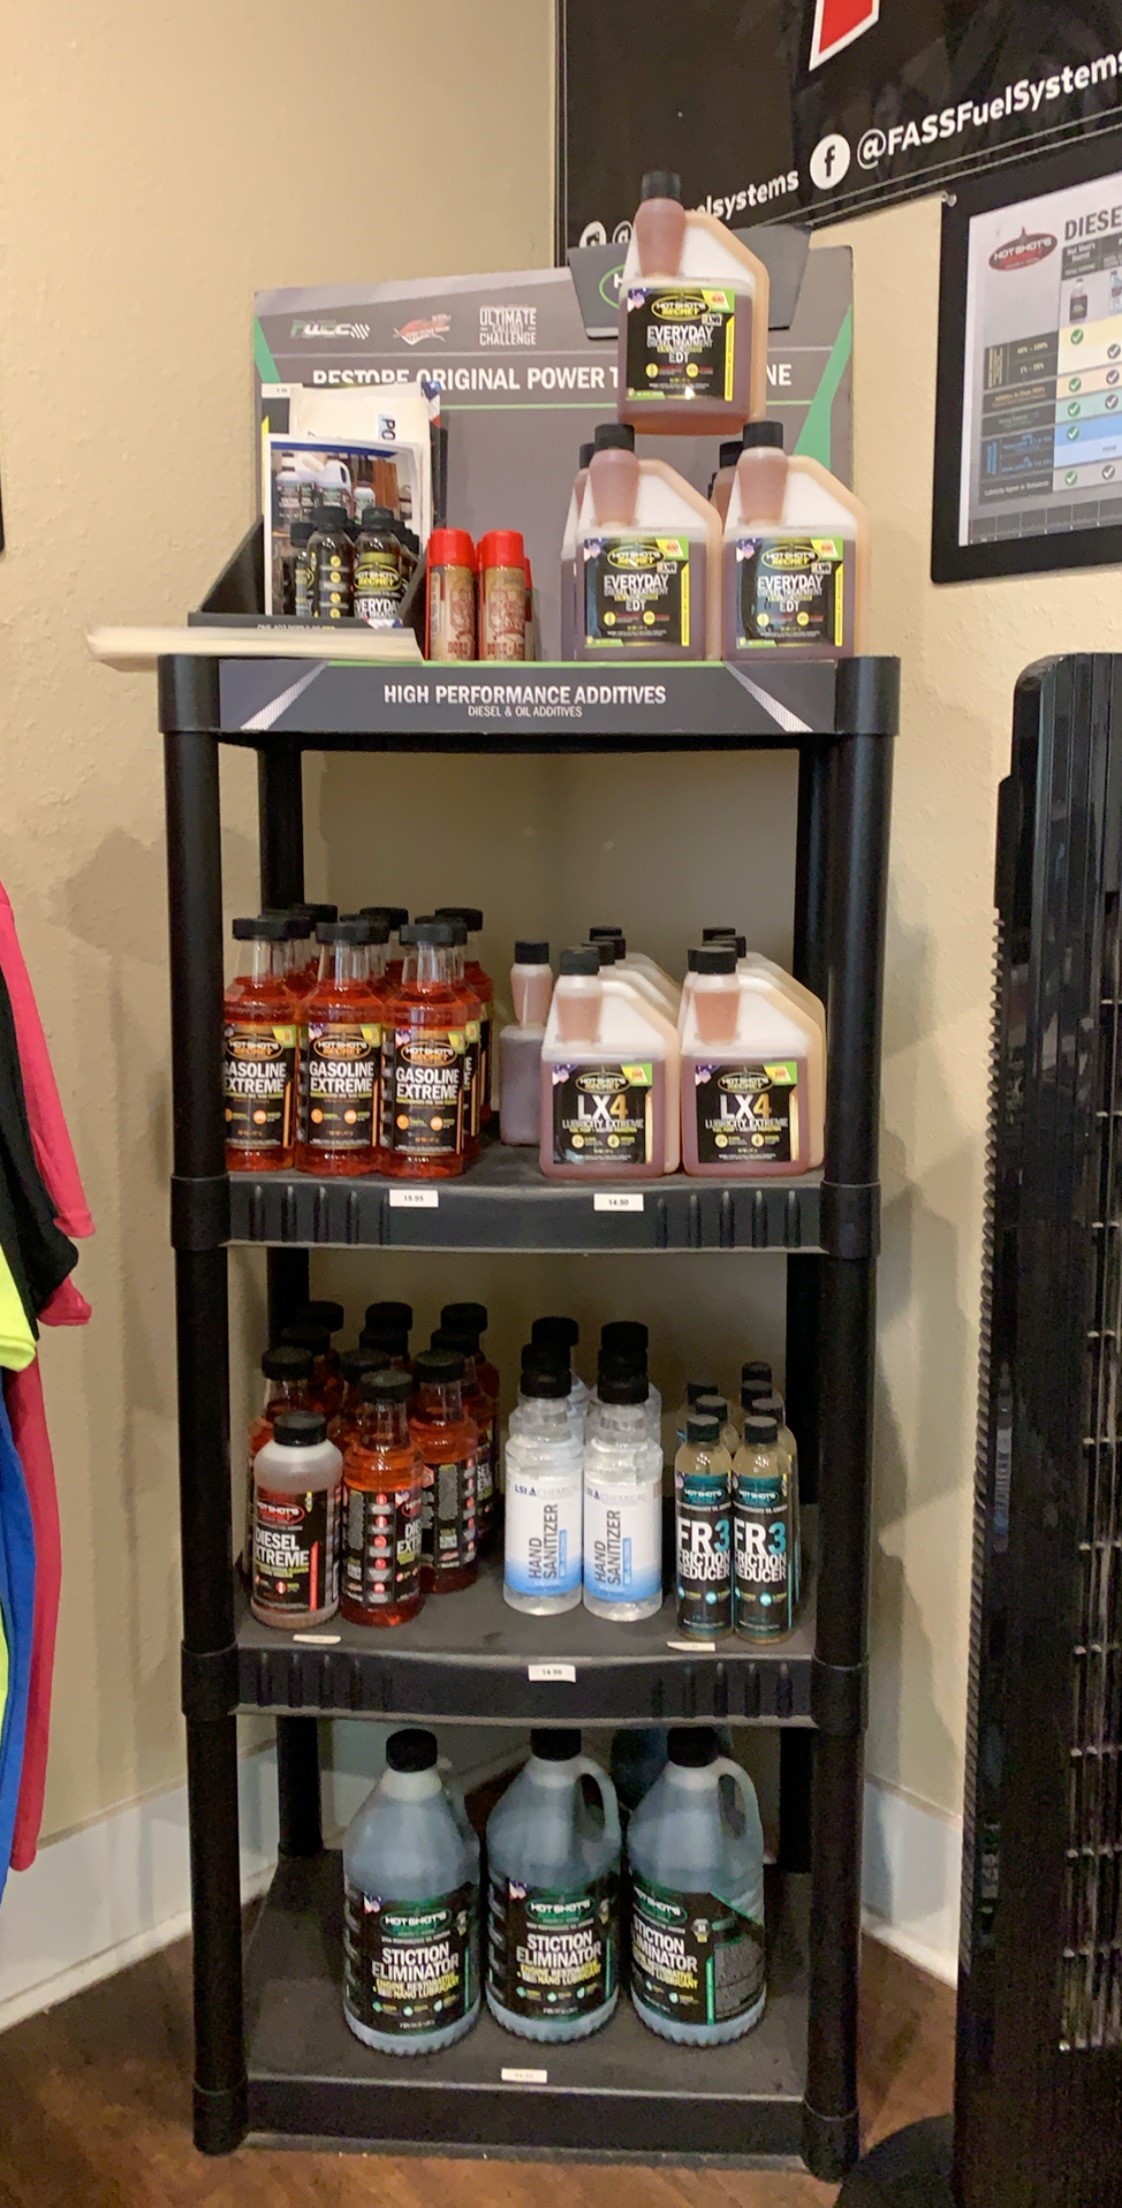 We have a full line of hotshots secret additives as well as 15w-40 full synthetic motor oil and tran Hastings Diesel Performance New Braunfels (830)406-1843